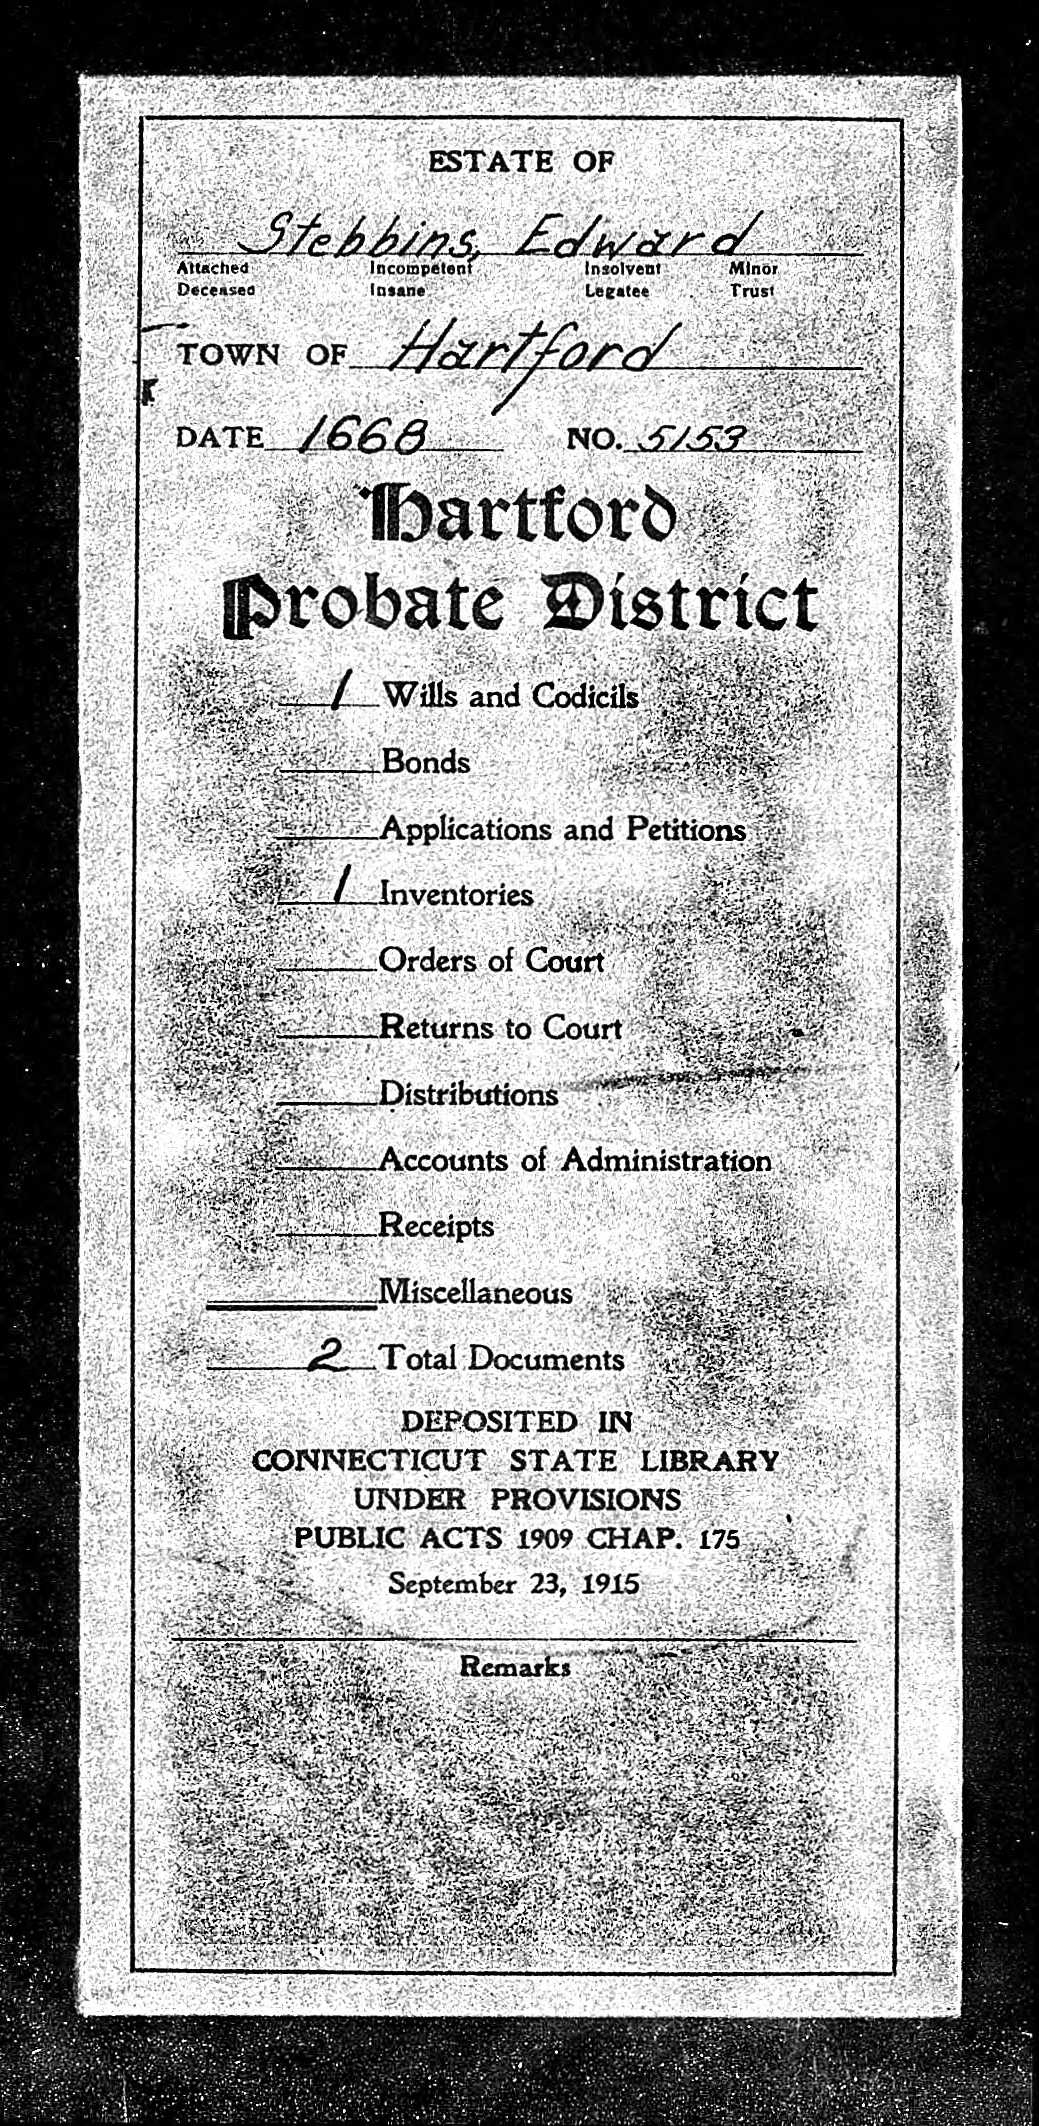 Cover page for the probate records of Edward Stebbins